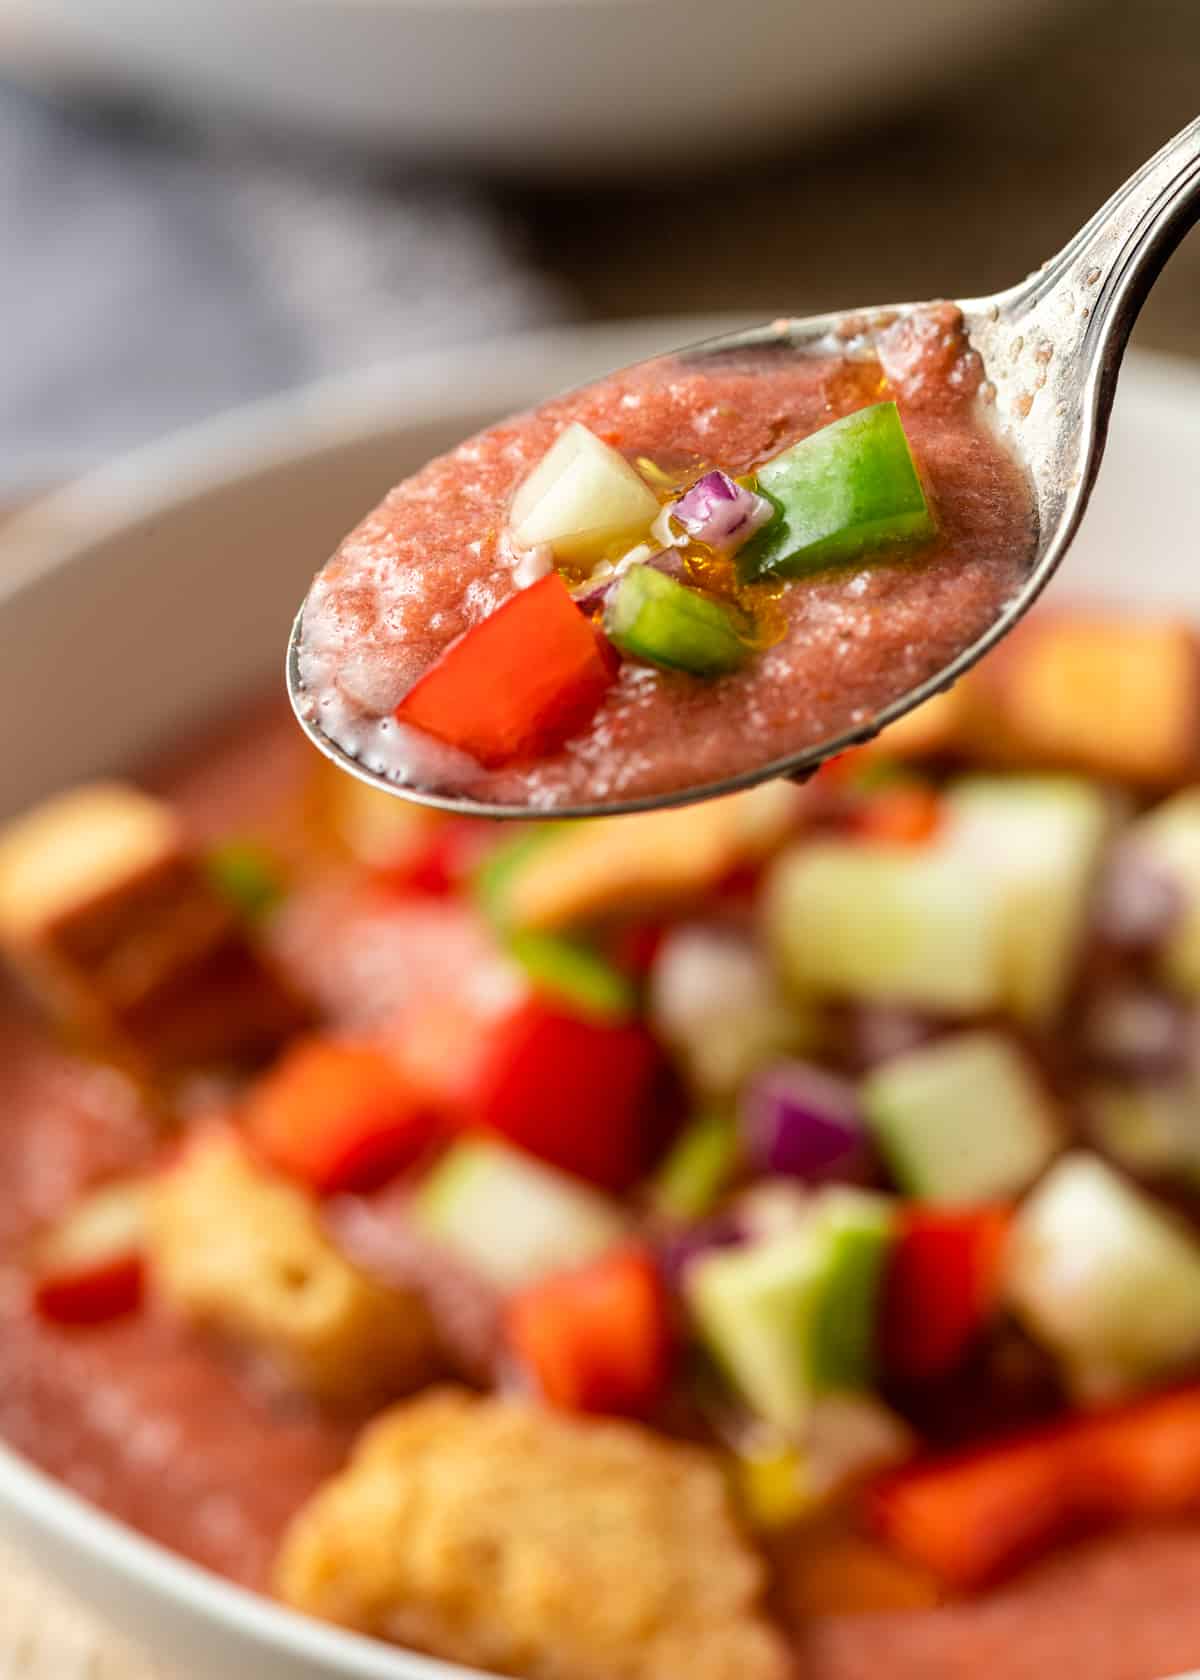 extreme closeup: a spoonful of gazpacho over a bowl of cold Spanish soup